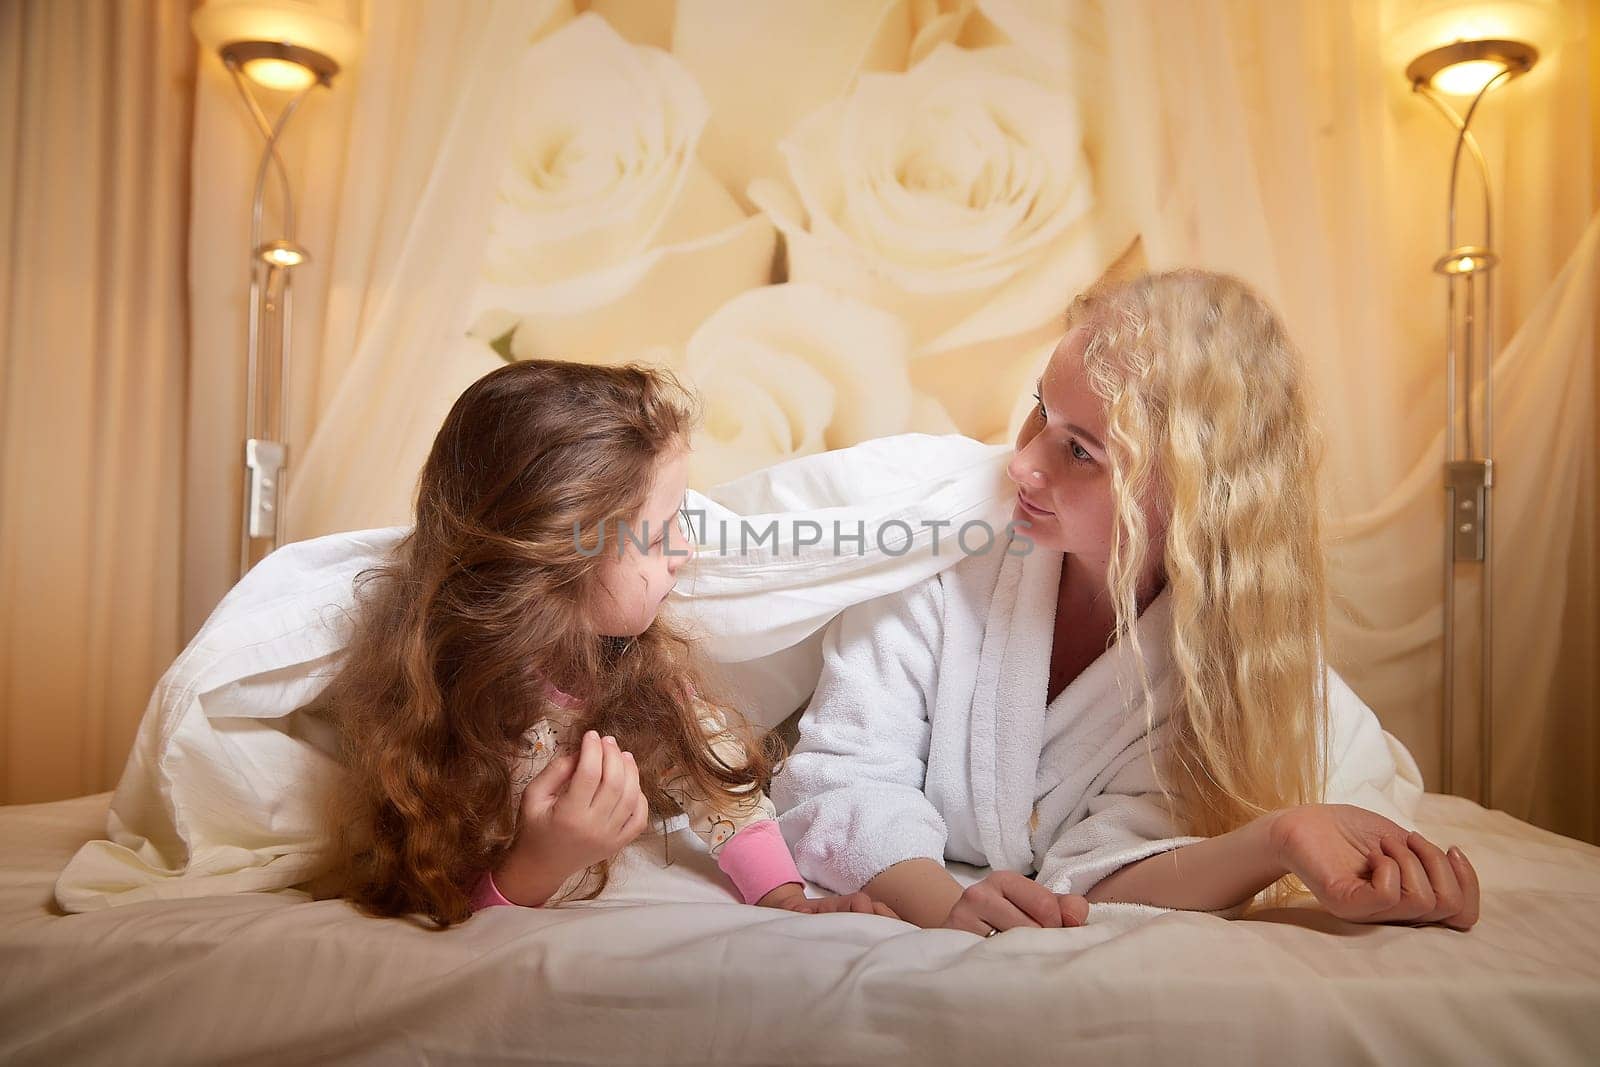 Mother and daughter happily relax and fun together on a bed in bedroom. The concept of tenderness between mom and girl by keleny